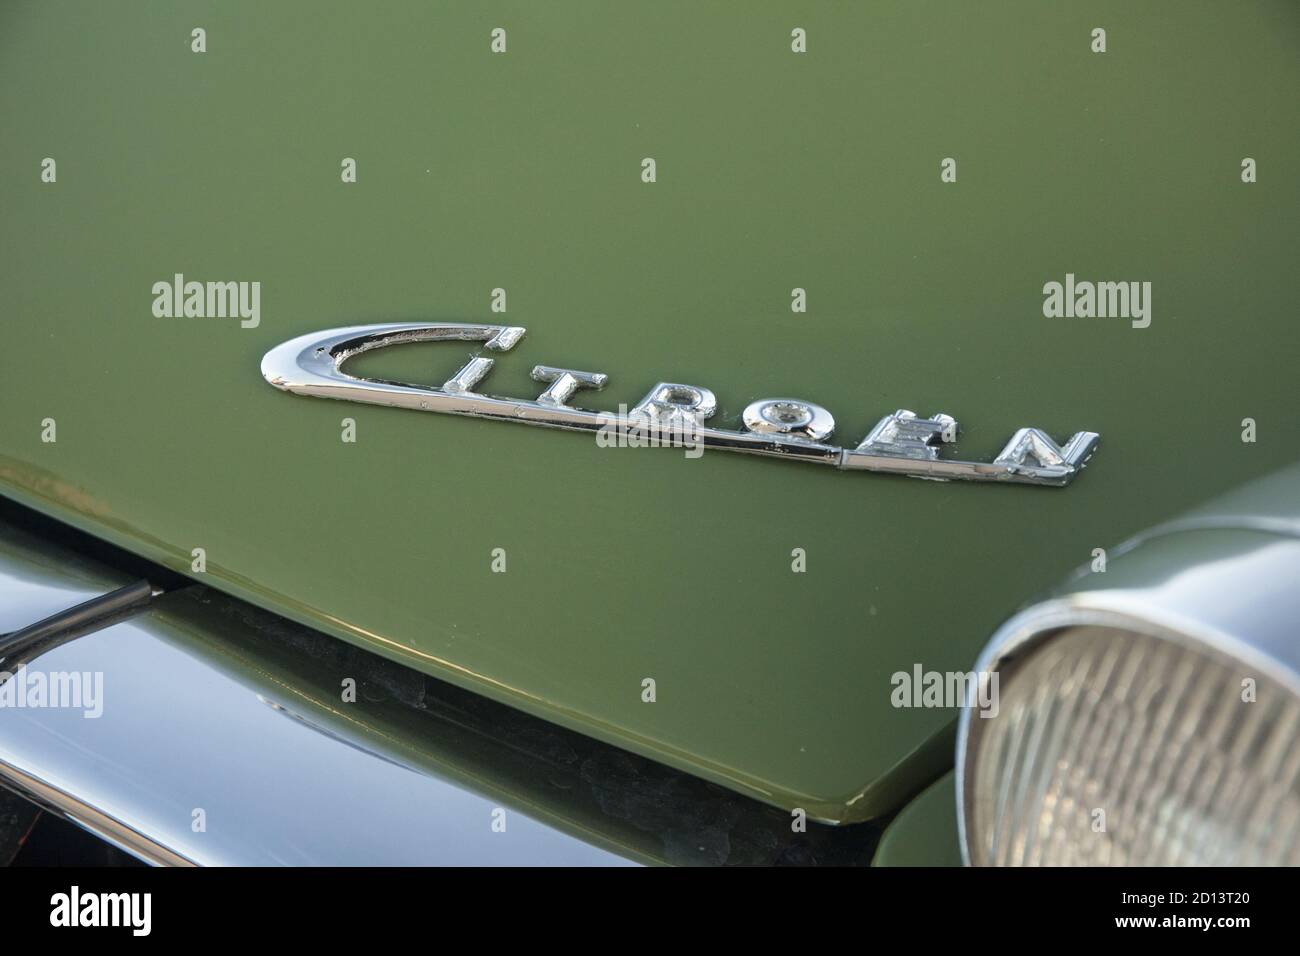 Citroen DS19, New Forest, UK, March 2015 Stock Photo